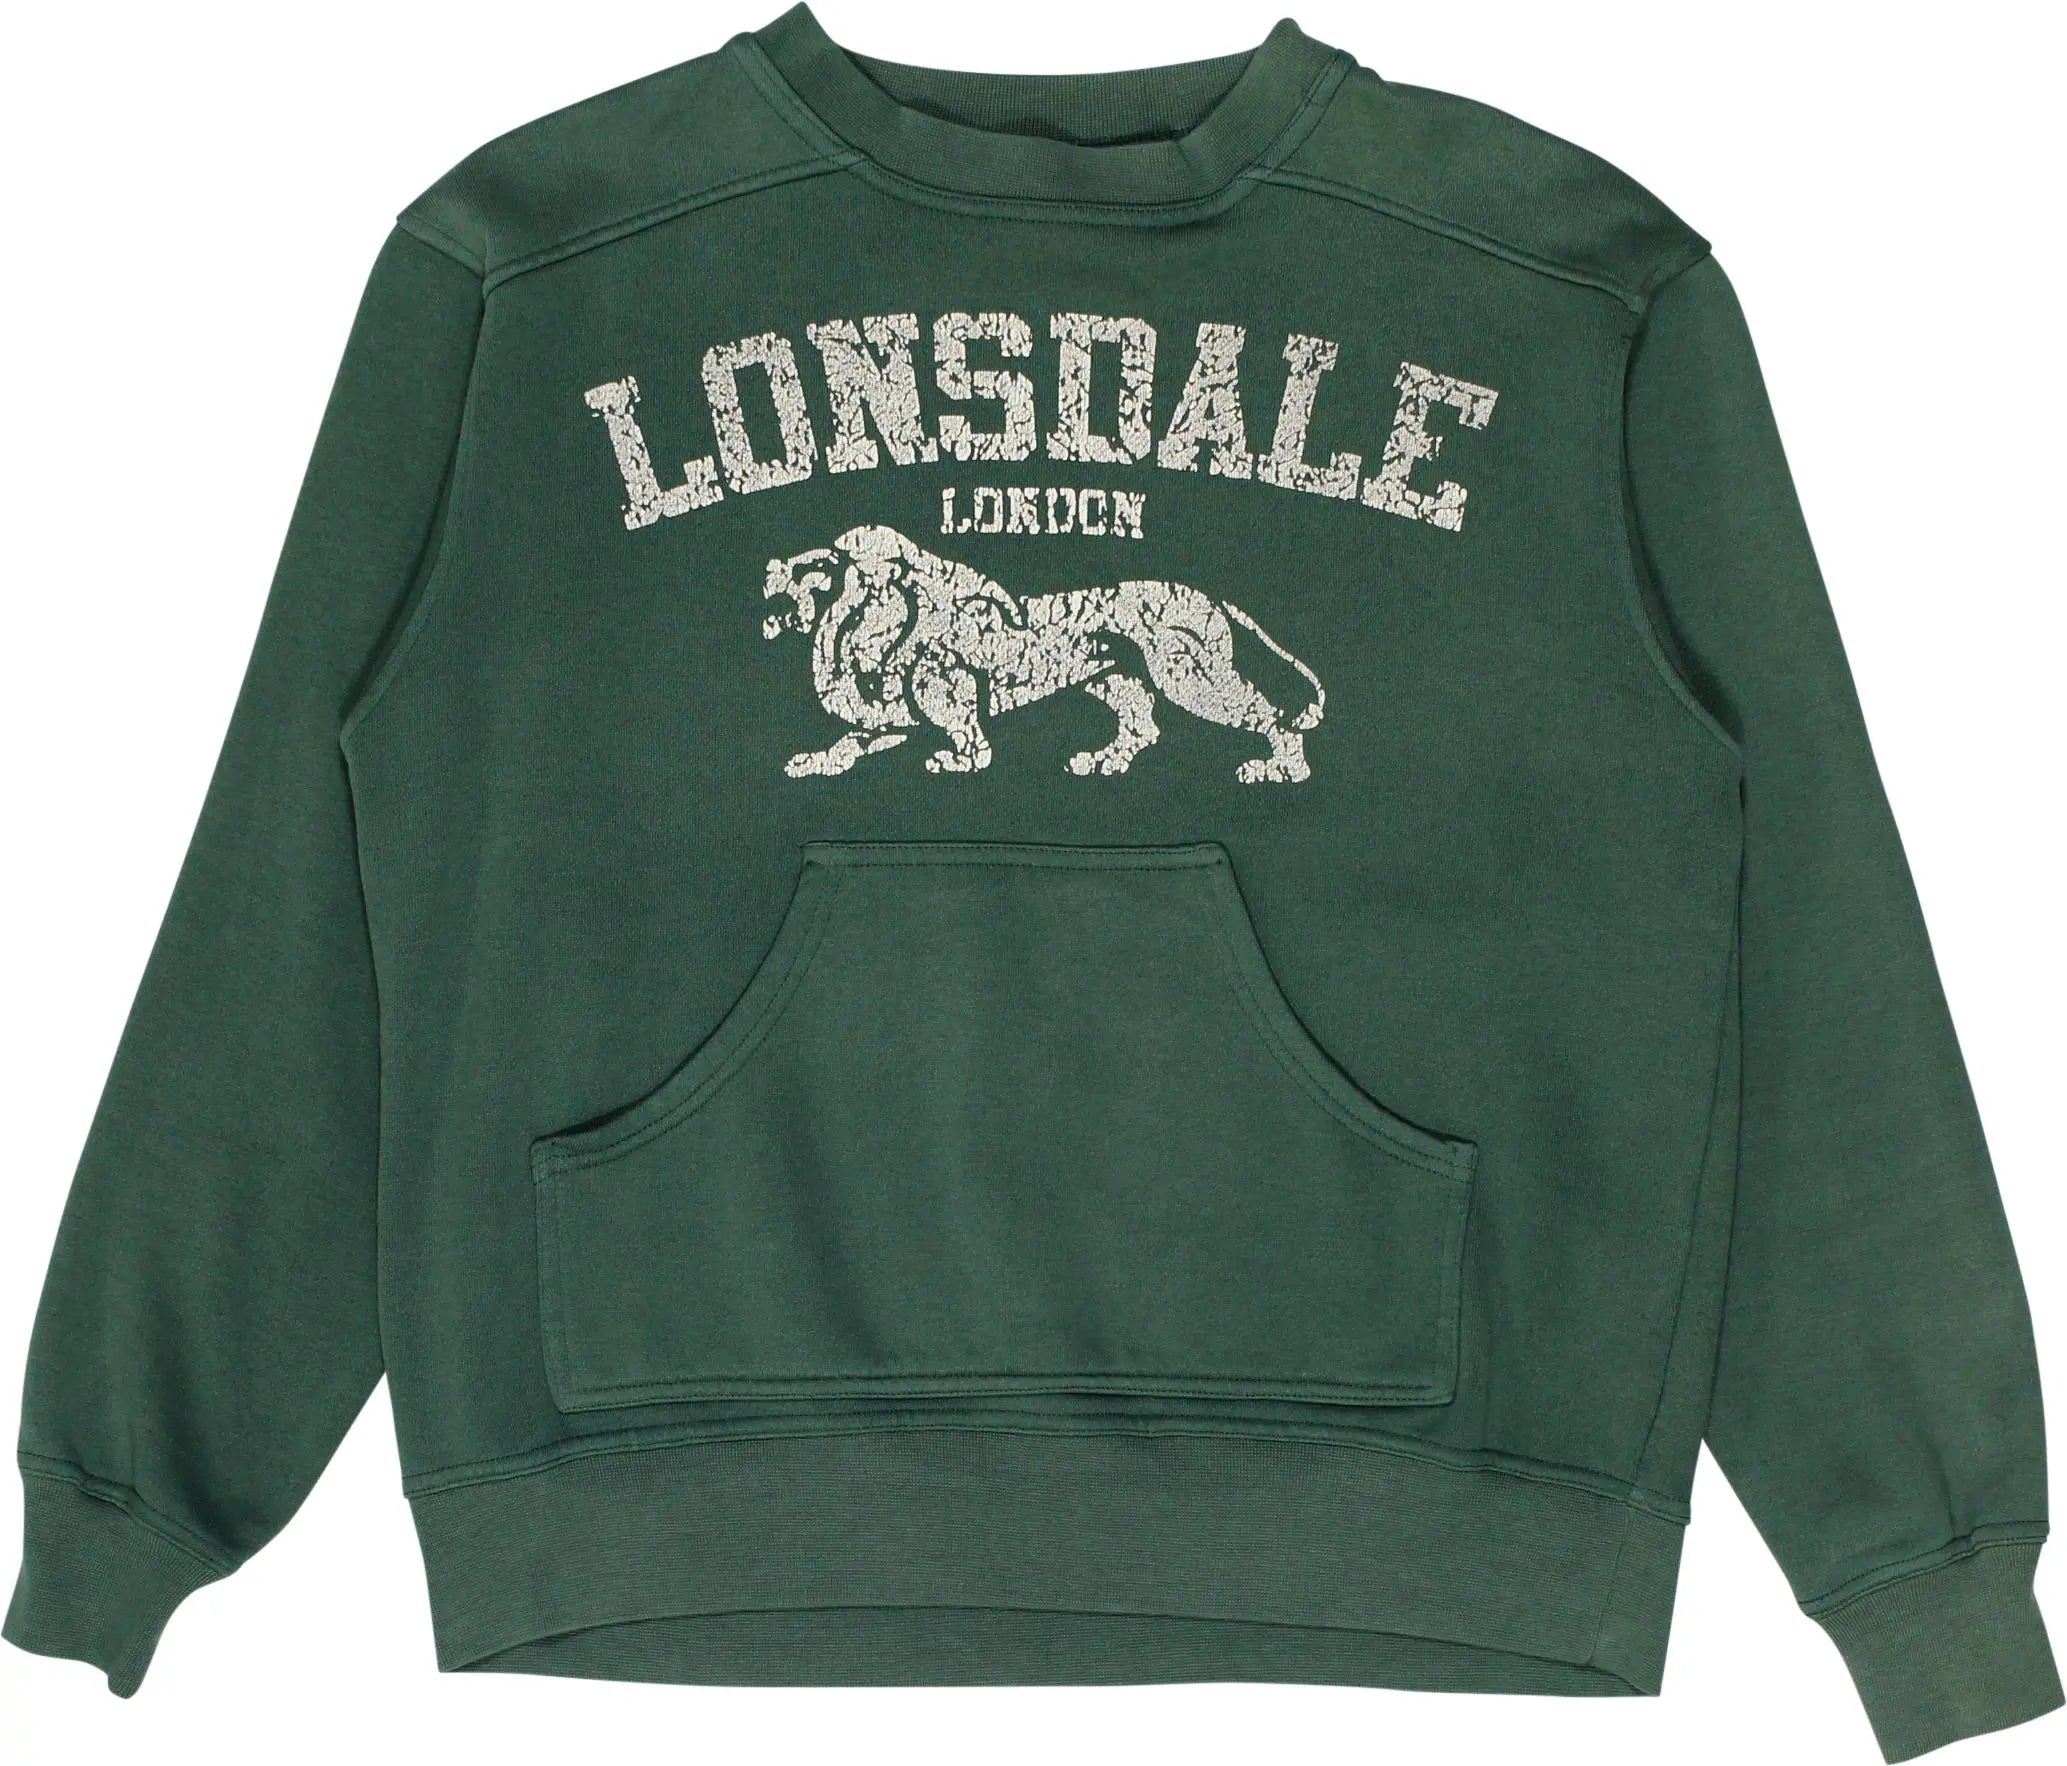 Lonsdale - Sweater by Lonsdale- ThriftTale.com - Vintage and second handclothing